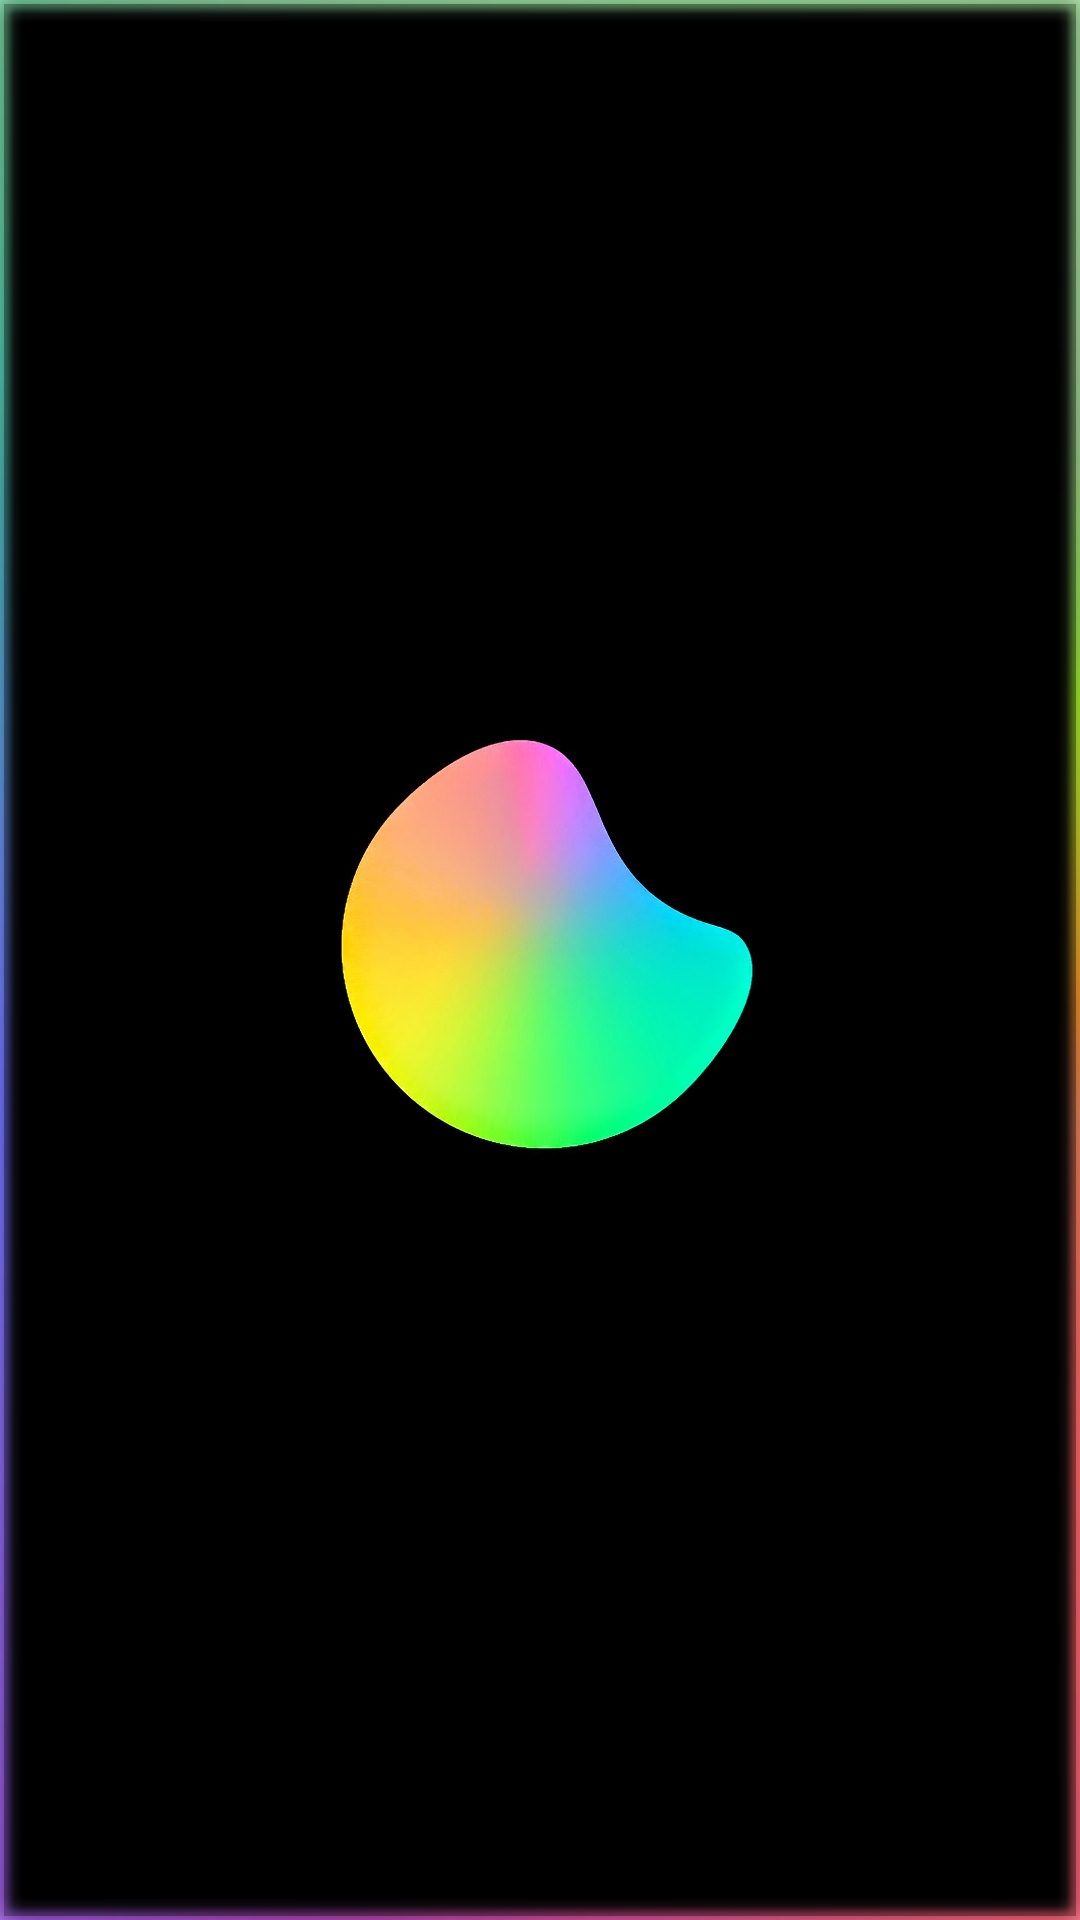 Combined Two Amoled And Colorful Wallpaper (for IPhone X And Non X)